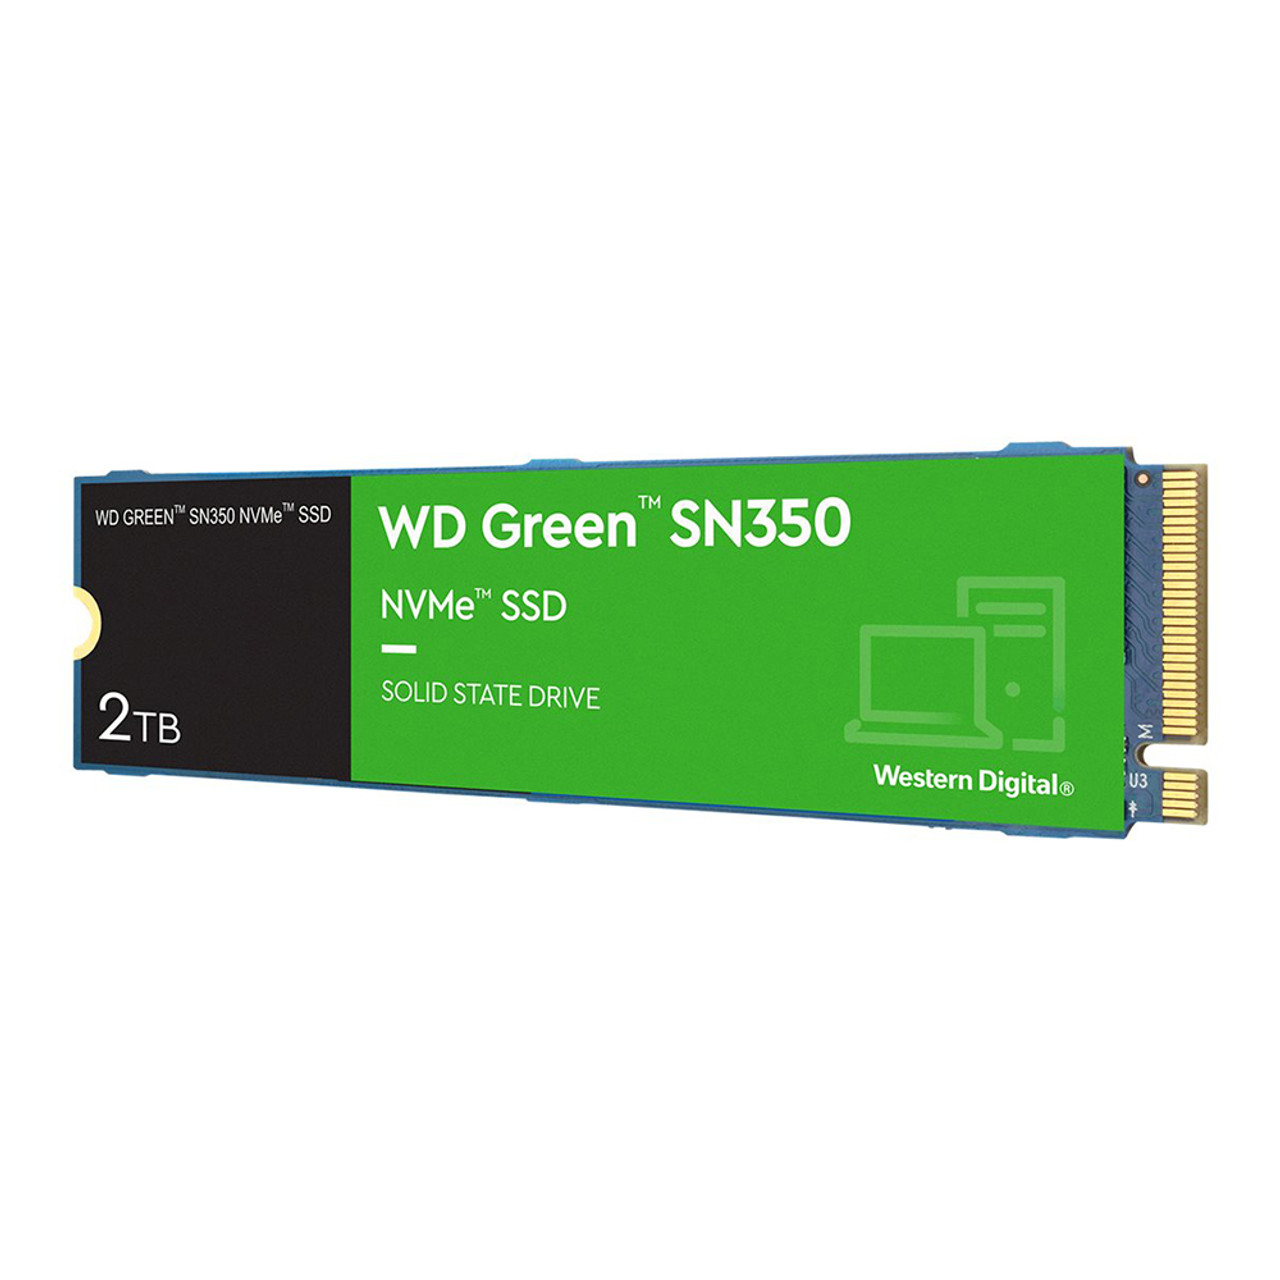 WD WDS200T3G0C 2TB WD Green SN350 NVMe Internal SSD Solid State Drive - Gen3 PCIe, QLC, M.2 2280, Up to 3,200 MB/s